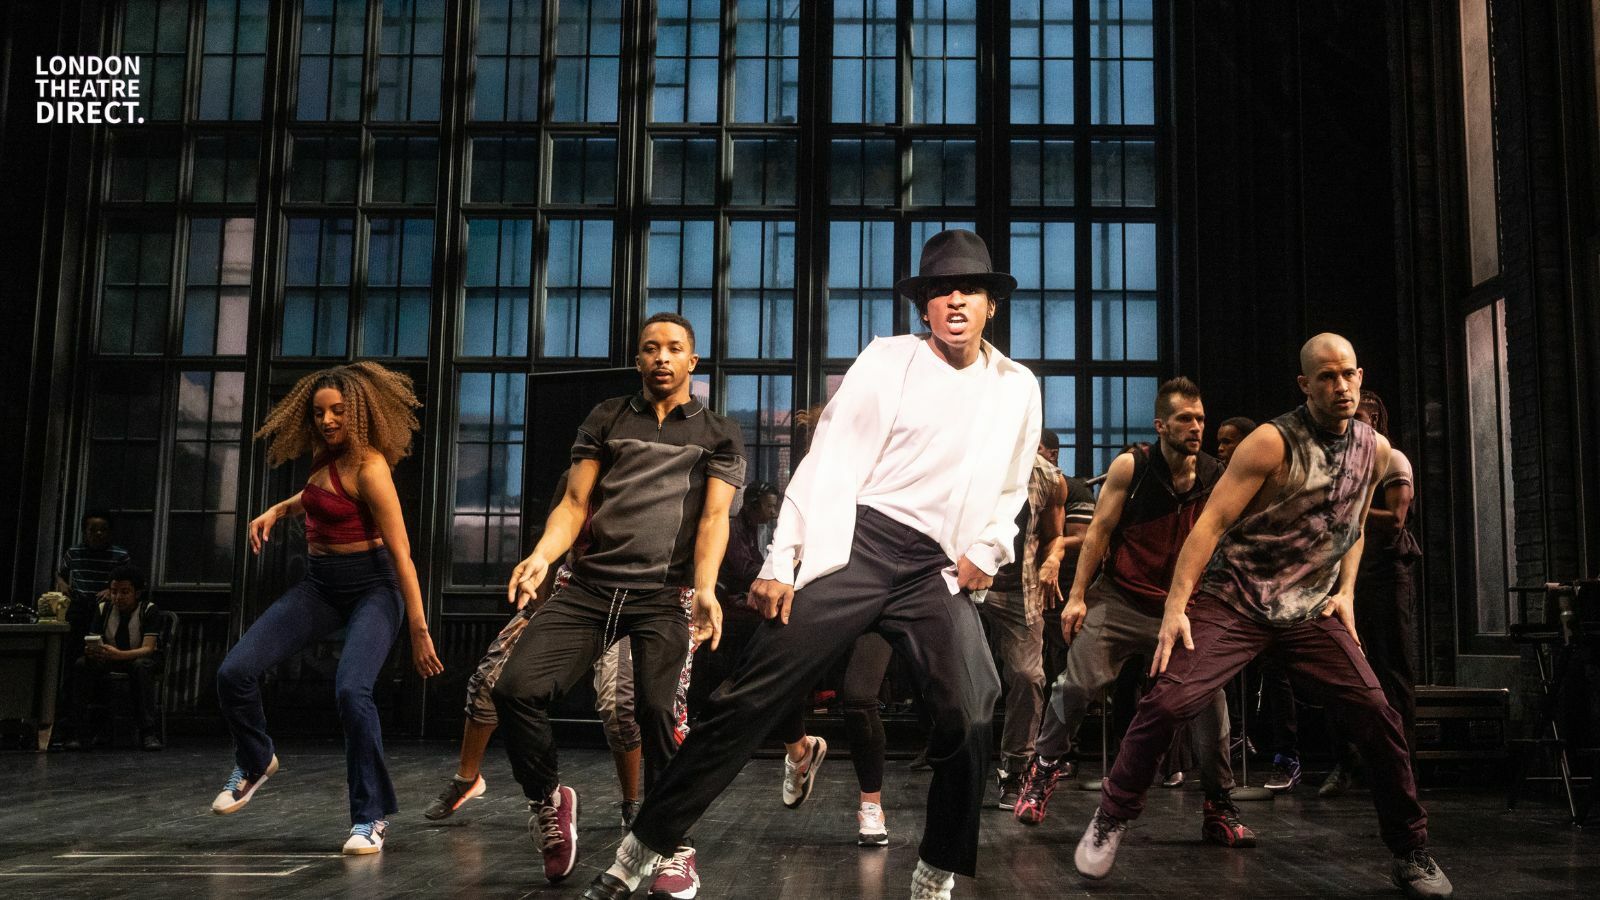 Myles Frost to star in West End premiere of MJ The Musical 